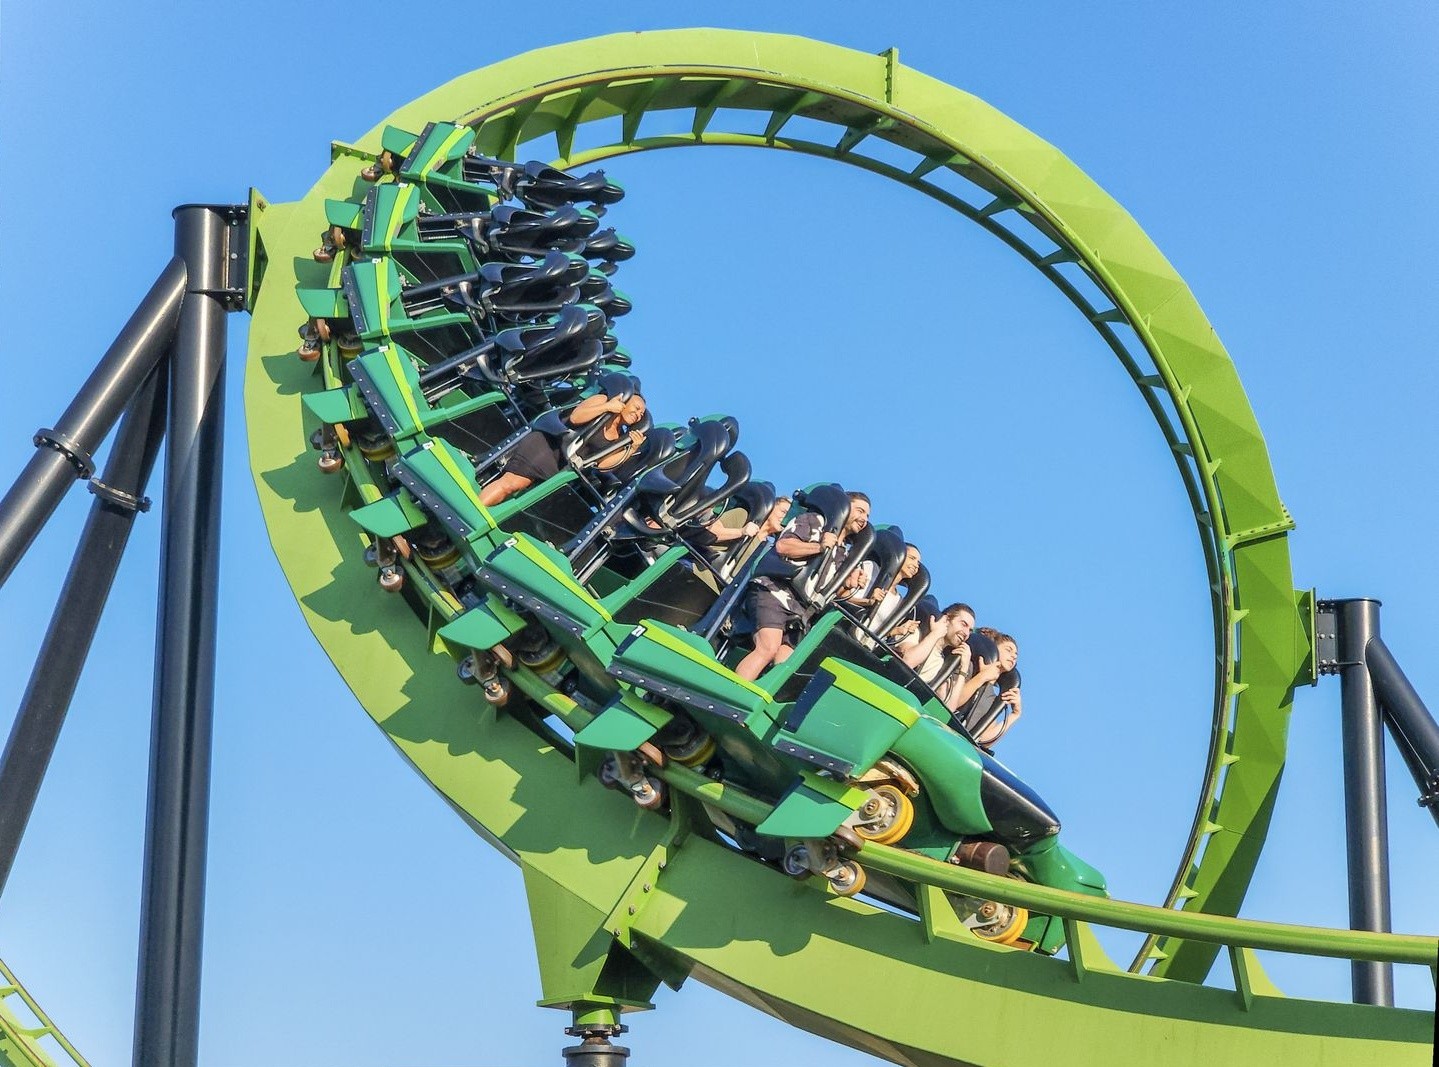 A corkscrew toward the end of Green Lantern's coaster track. The track is light green. The train is darker green.